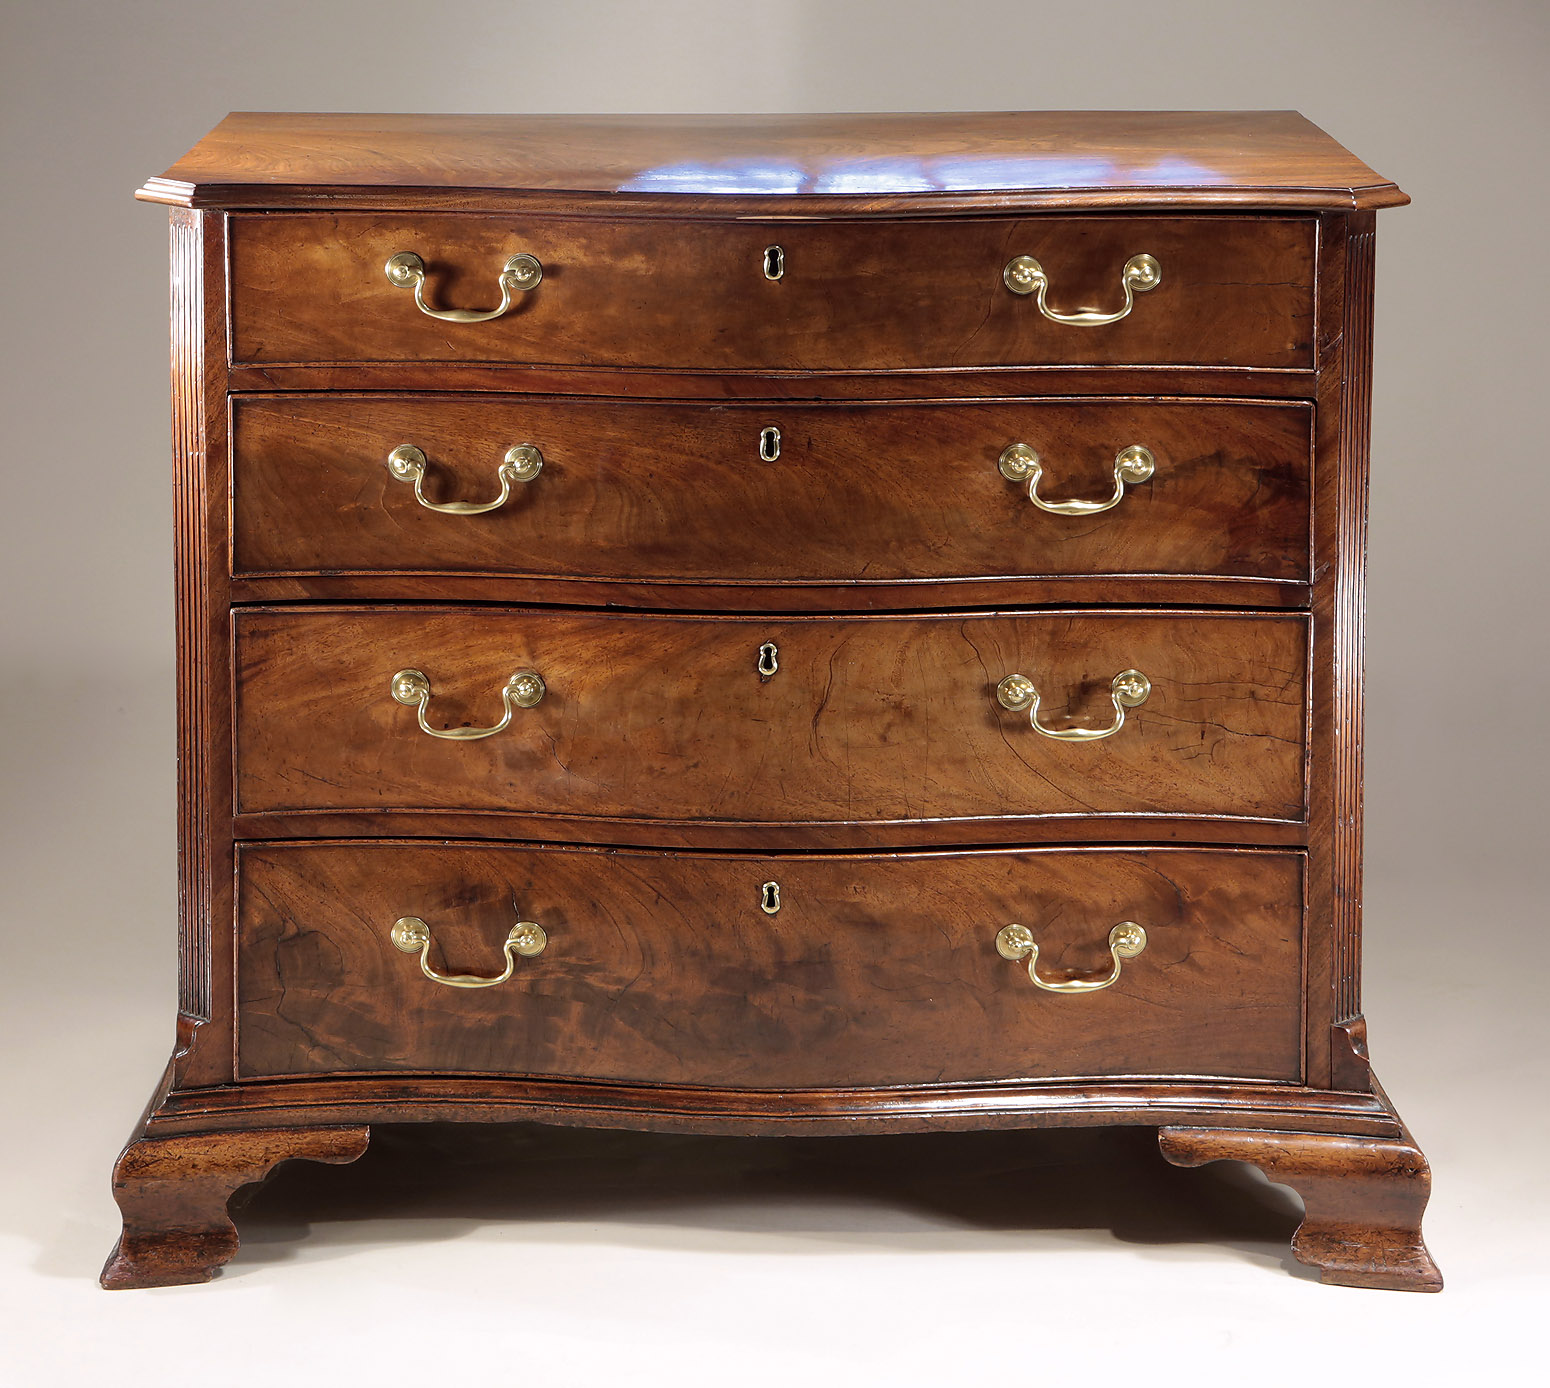 Fine_Early_George_III_Mahogany_Serpentine_Chest_c1760_frontal_1550w